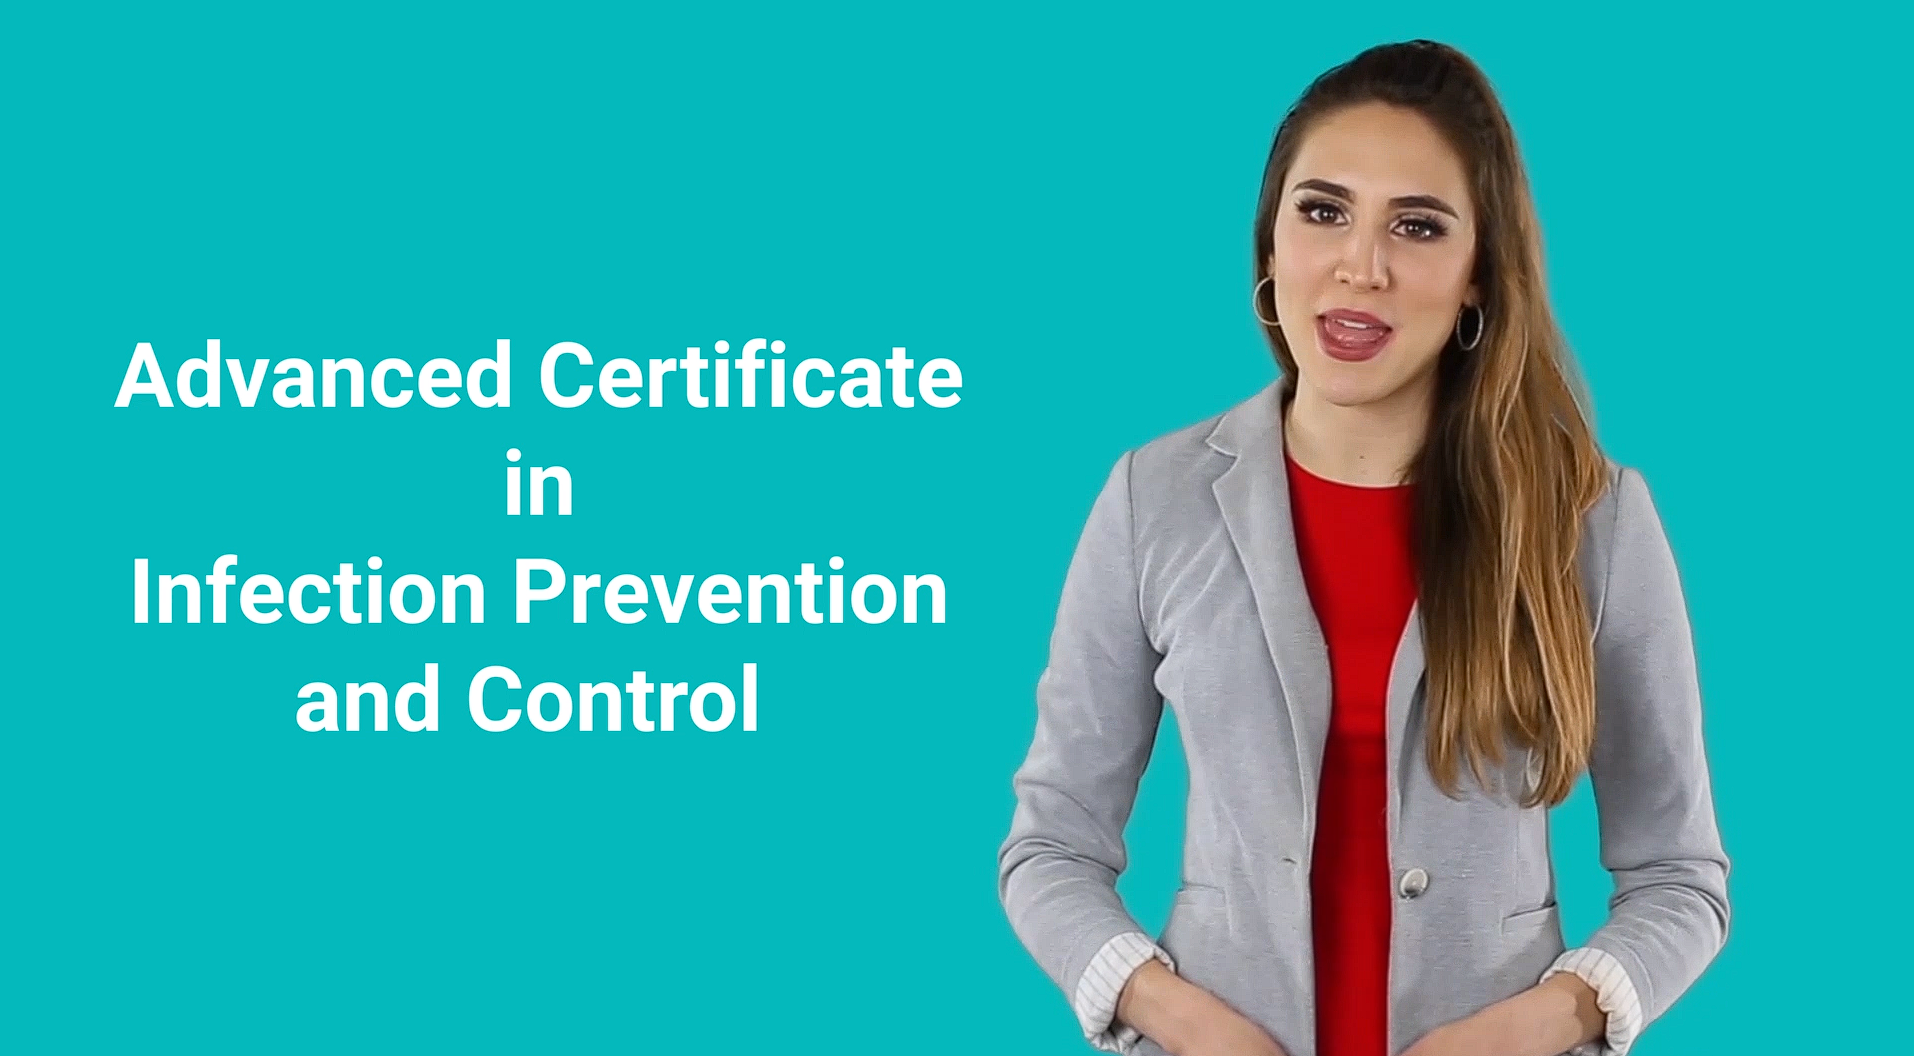 Advanced Certificate in Infection Prevention and Control